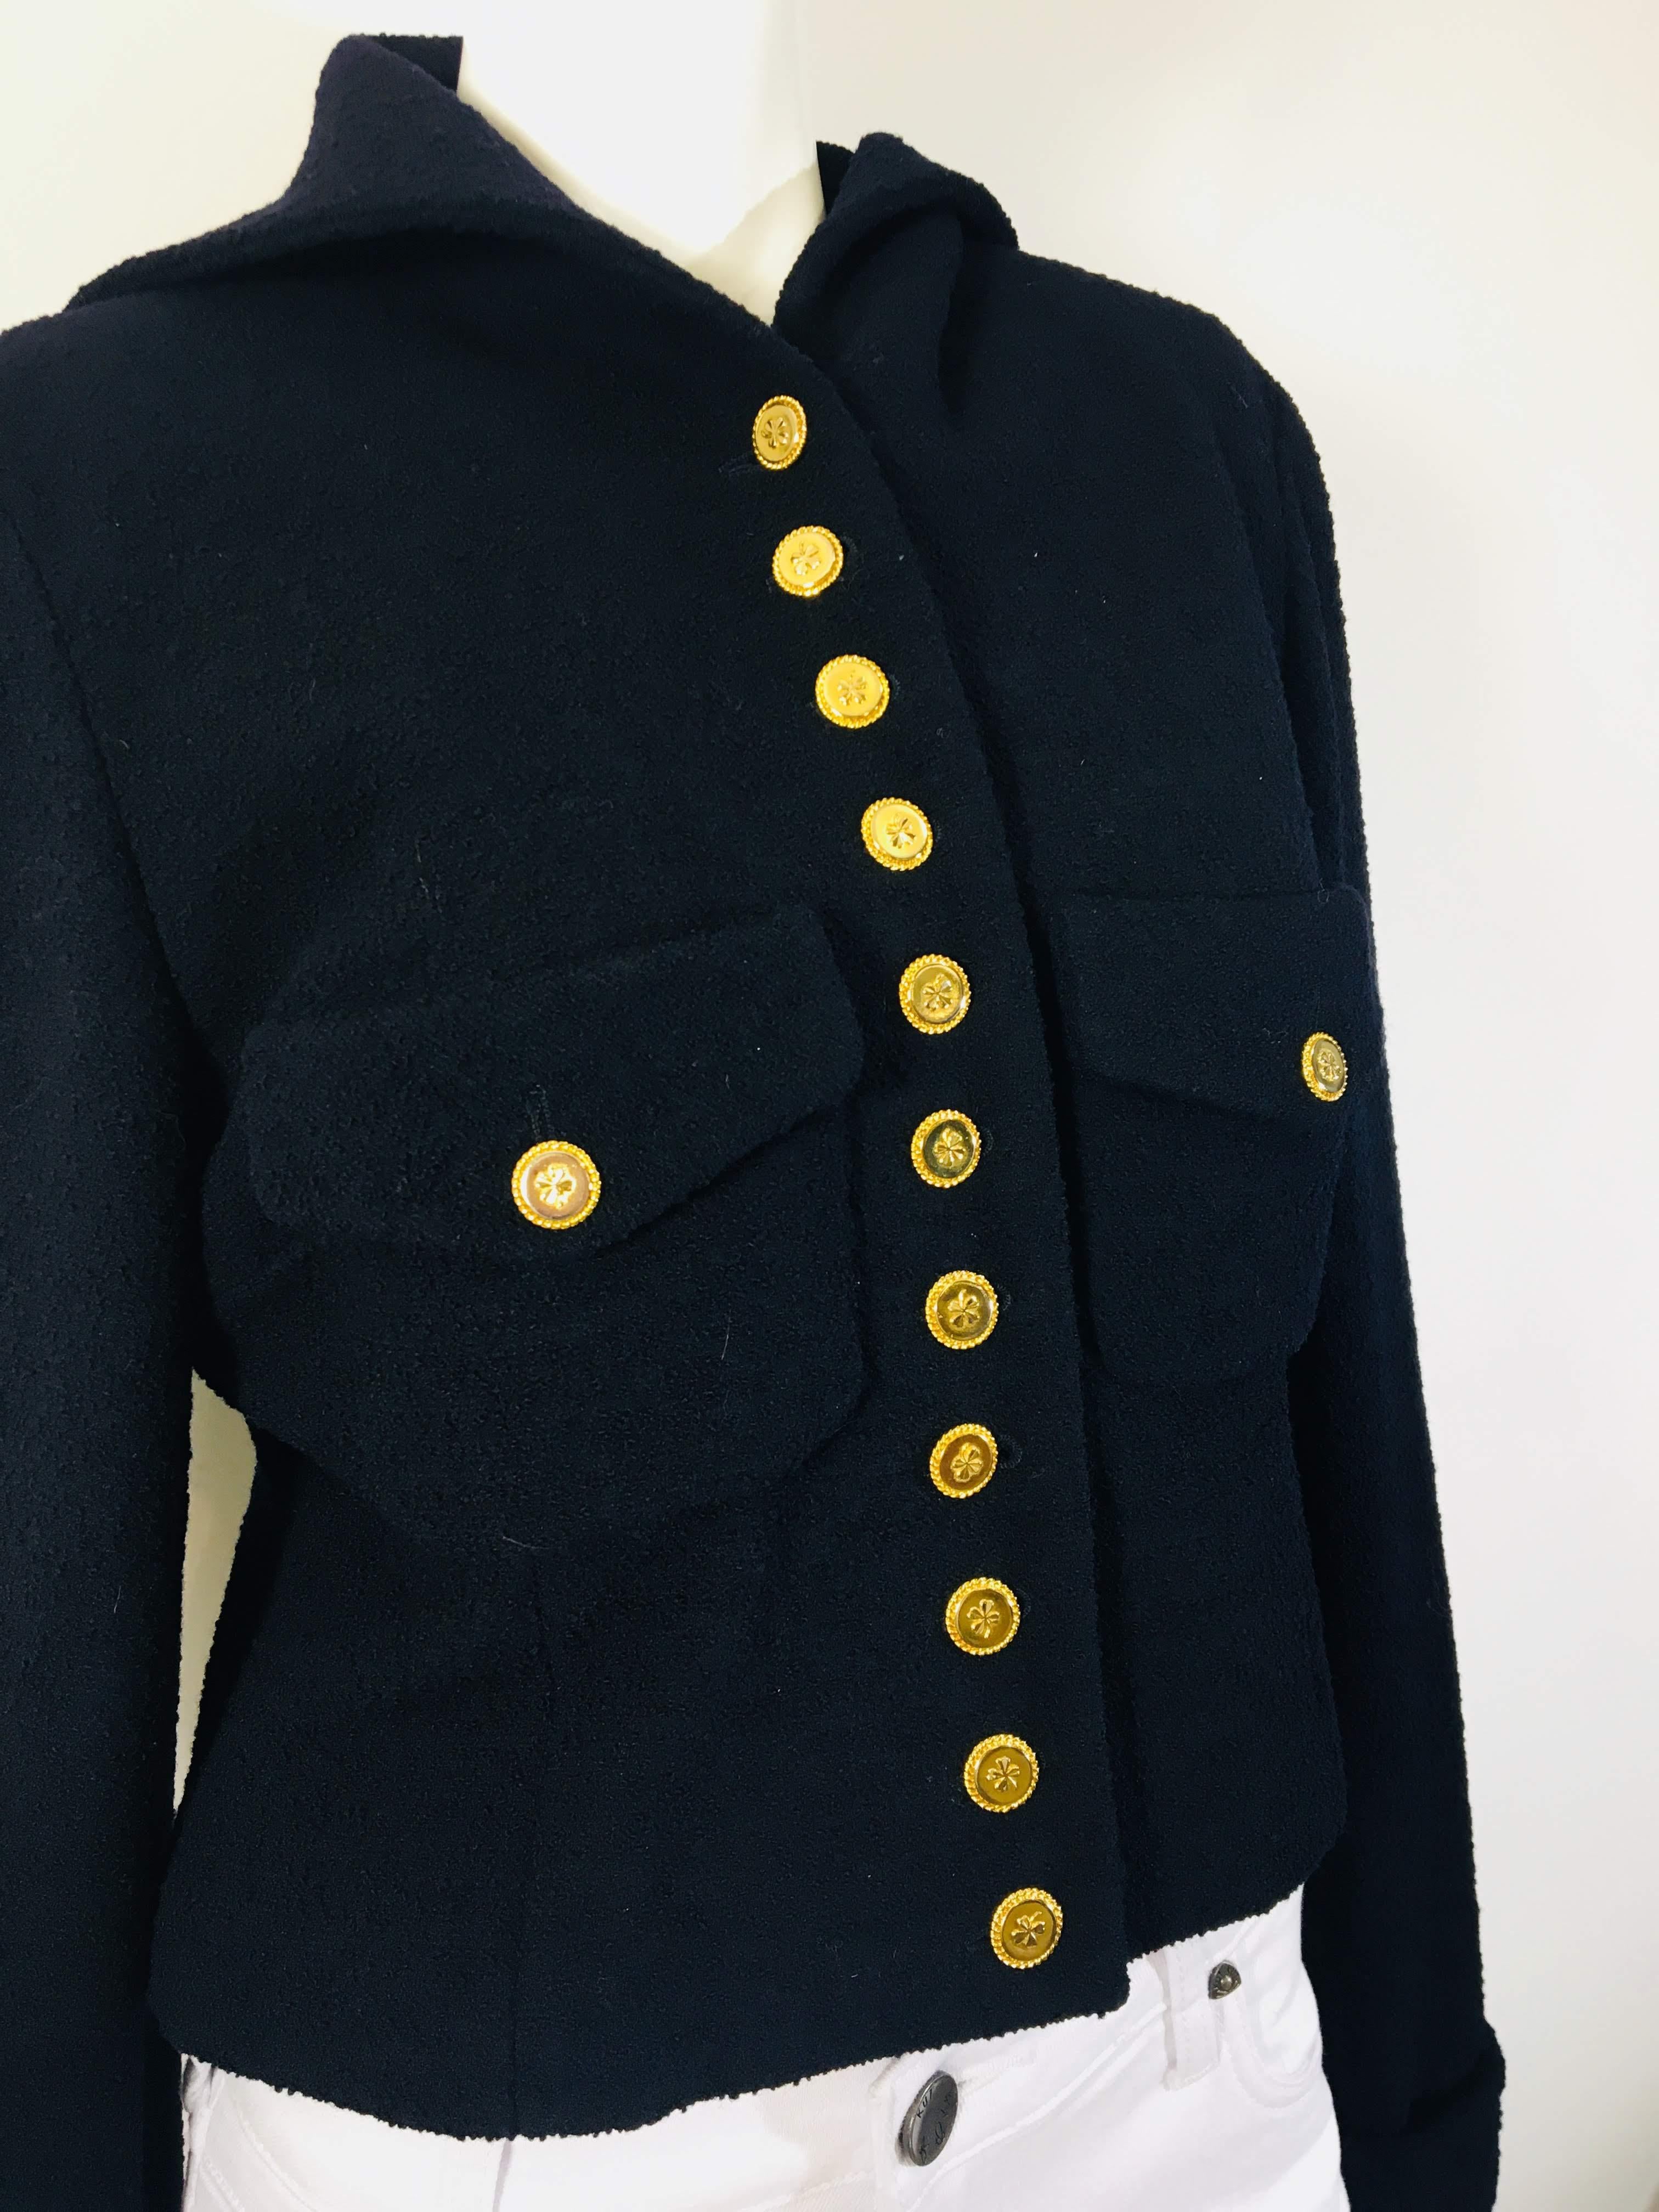 Chanel 11-Button Up Navy Jacket
Gold Four Leaf Clover Buttons
Over Size Collar
Three Clover Buttons on Sleeves
Size Label was cut out- 
Measurements are:
18